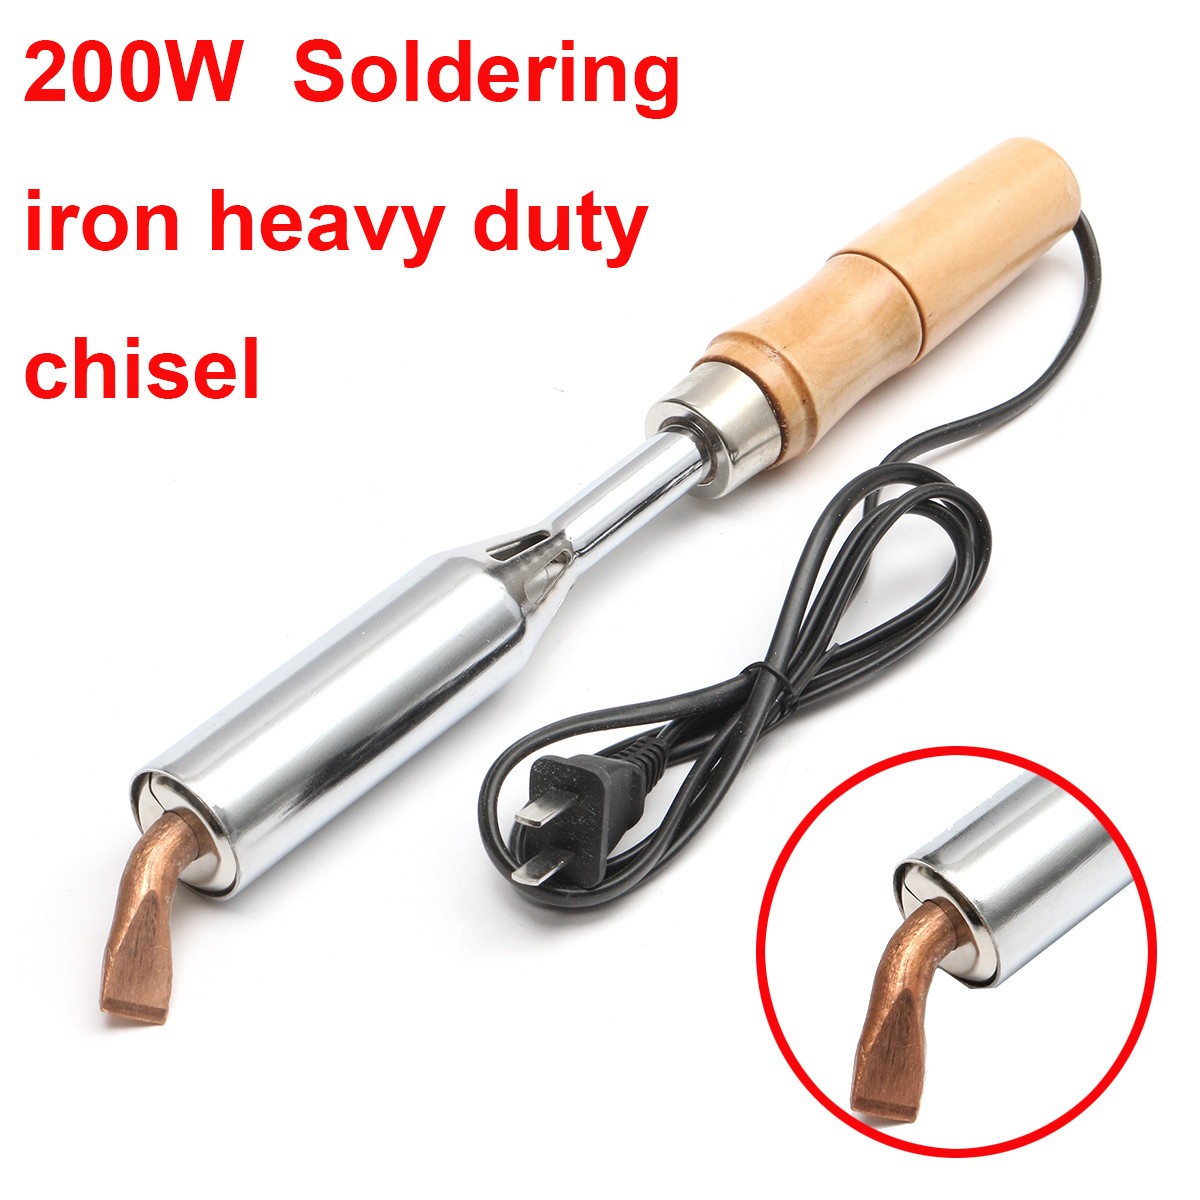 500W 220V Soldering Iron Heavy Duty Chisel Point Copper Tip Craft Manufacturing